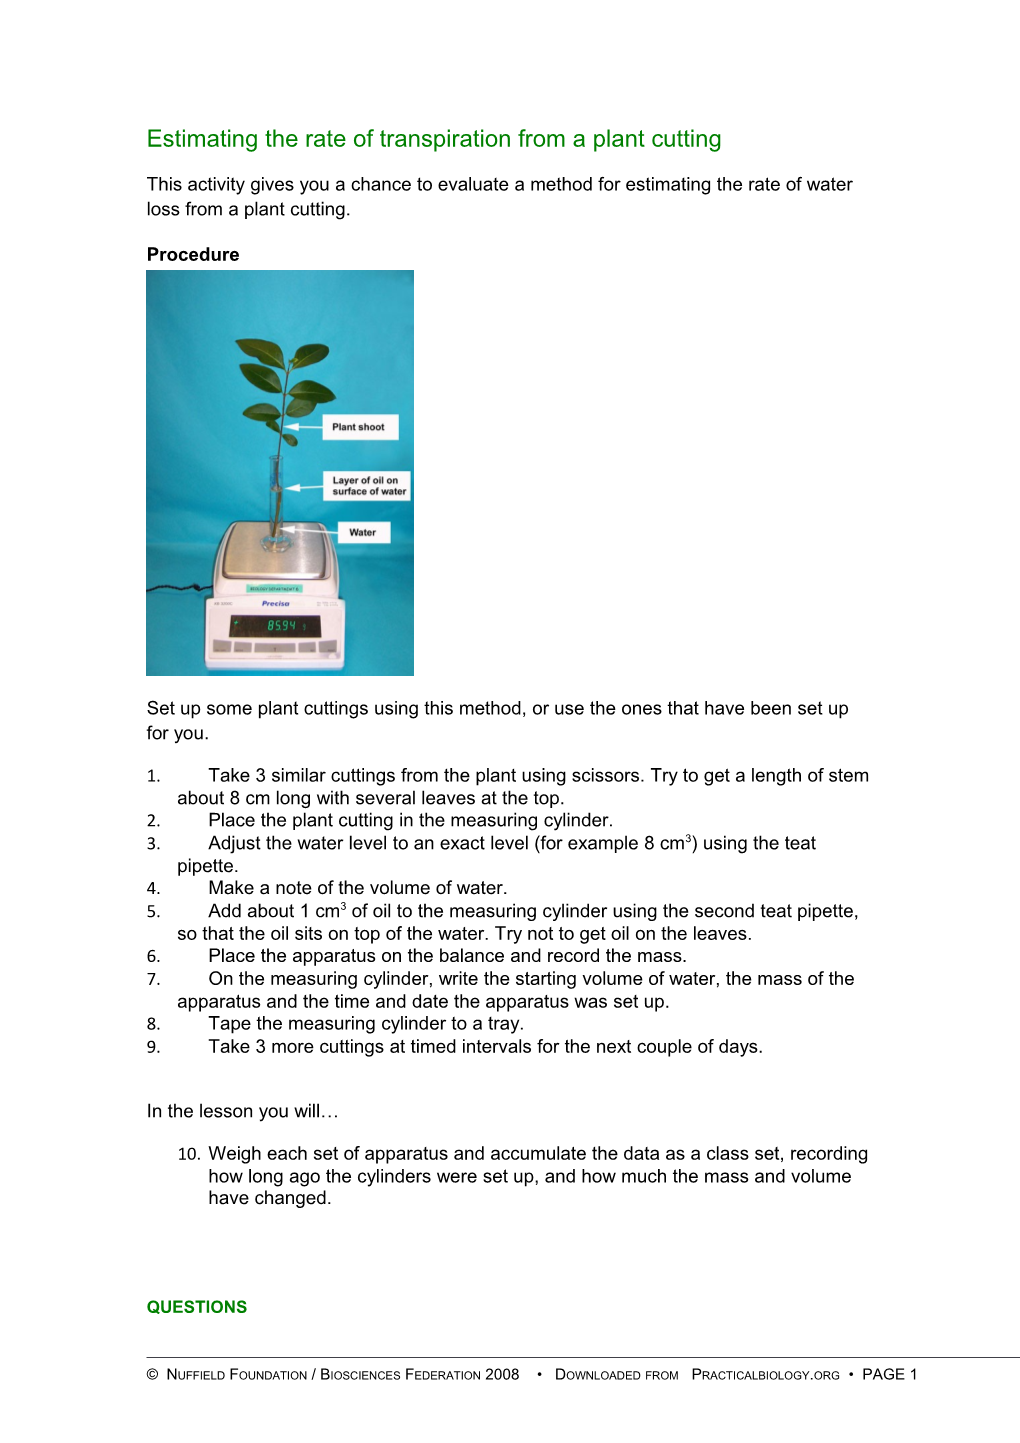 Estimating the Rate of Transpiration from a Plant Cutting